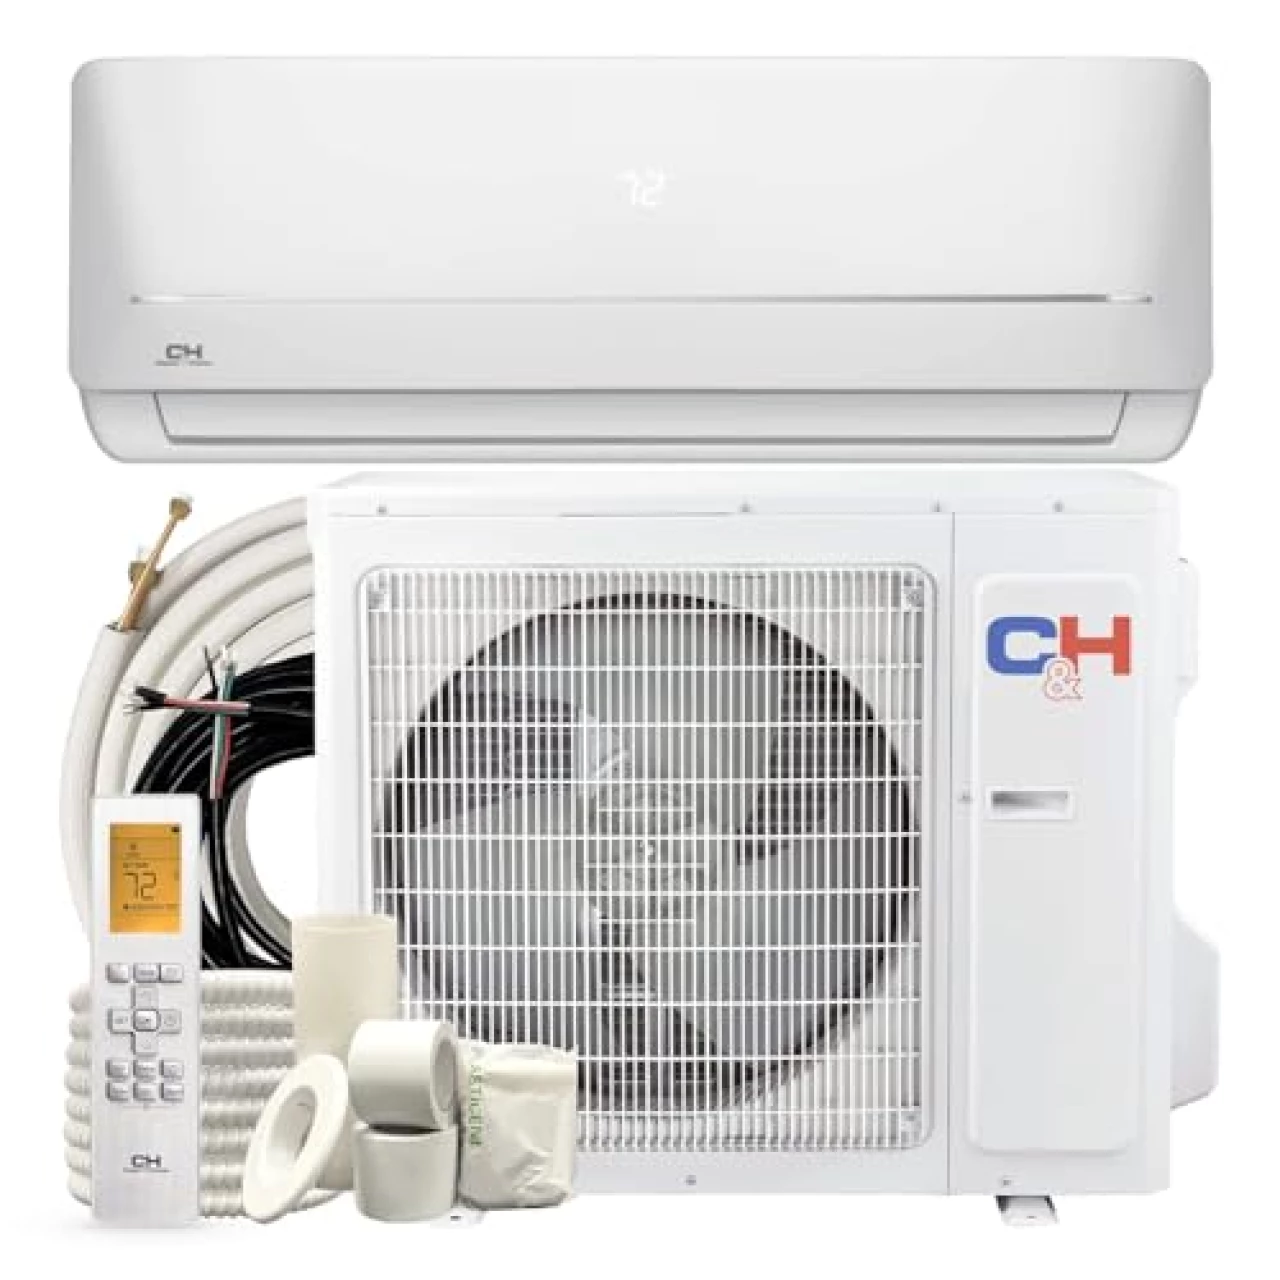 Cooper &amp; Hunter MIA Series, Mini Split Air Conditioner and Heater, 9,000 BTU, 115V, 21.5 SEER2, Wall Mount Ductless Inverter System, With Installation kit